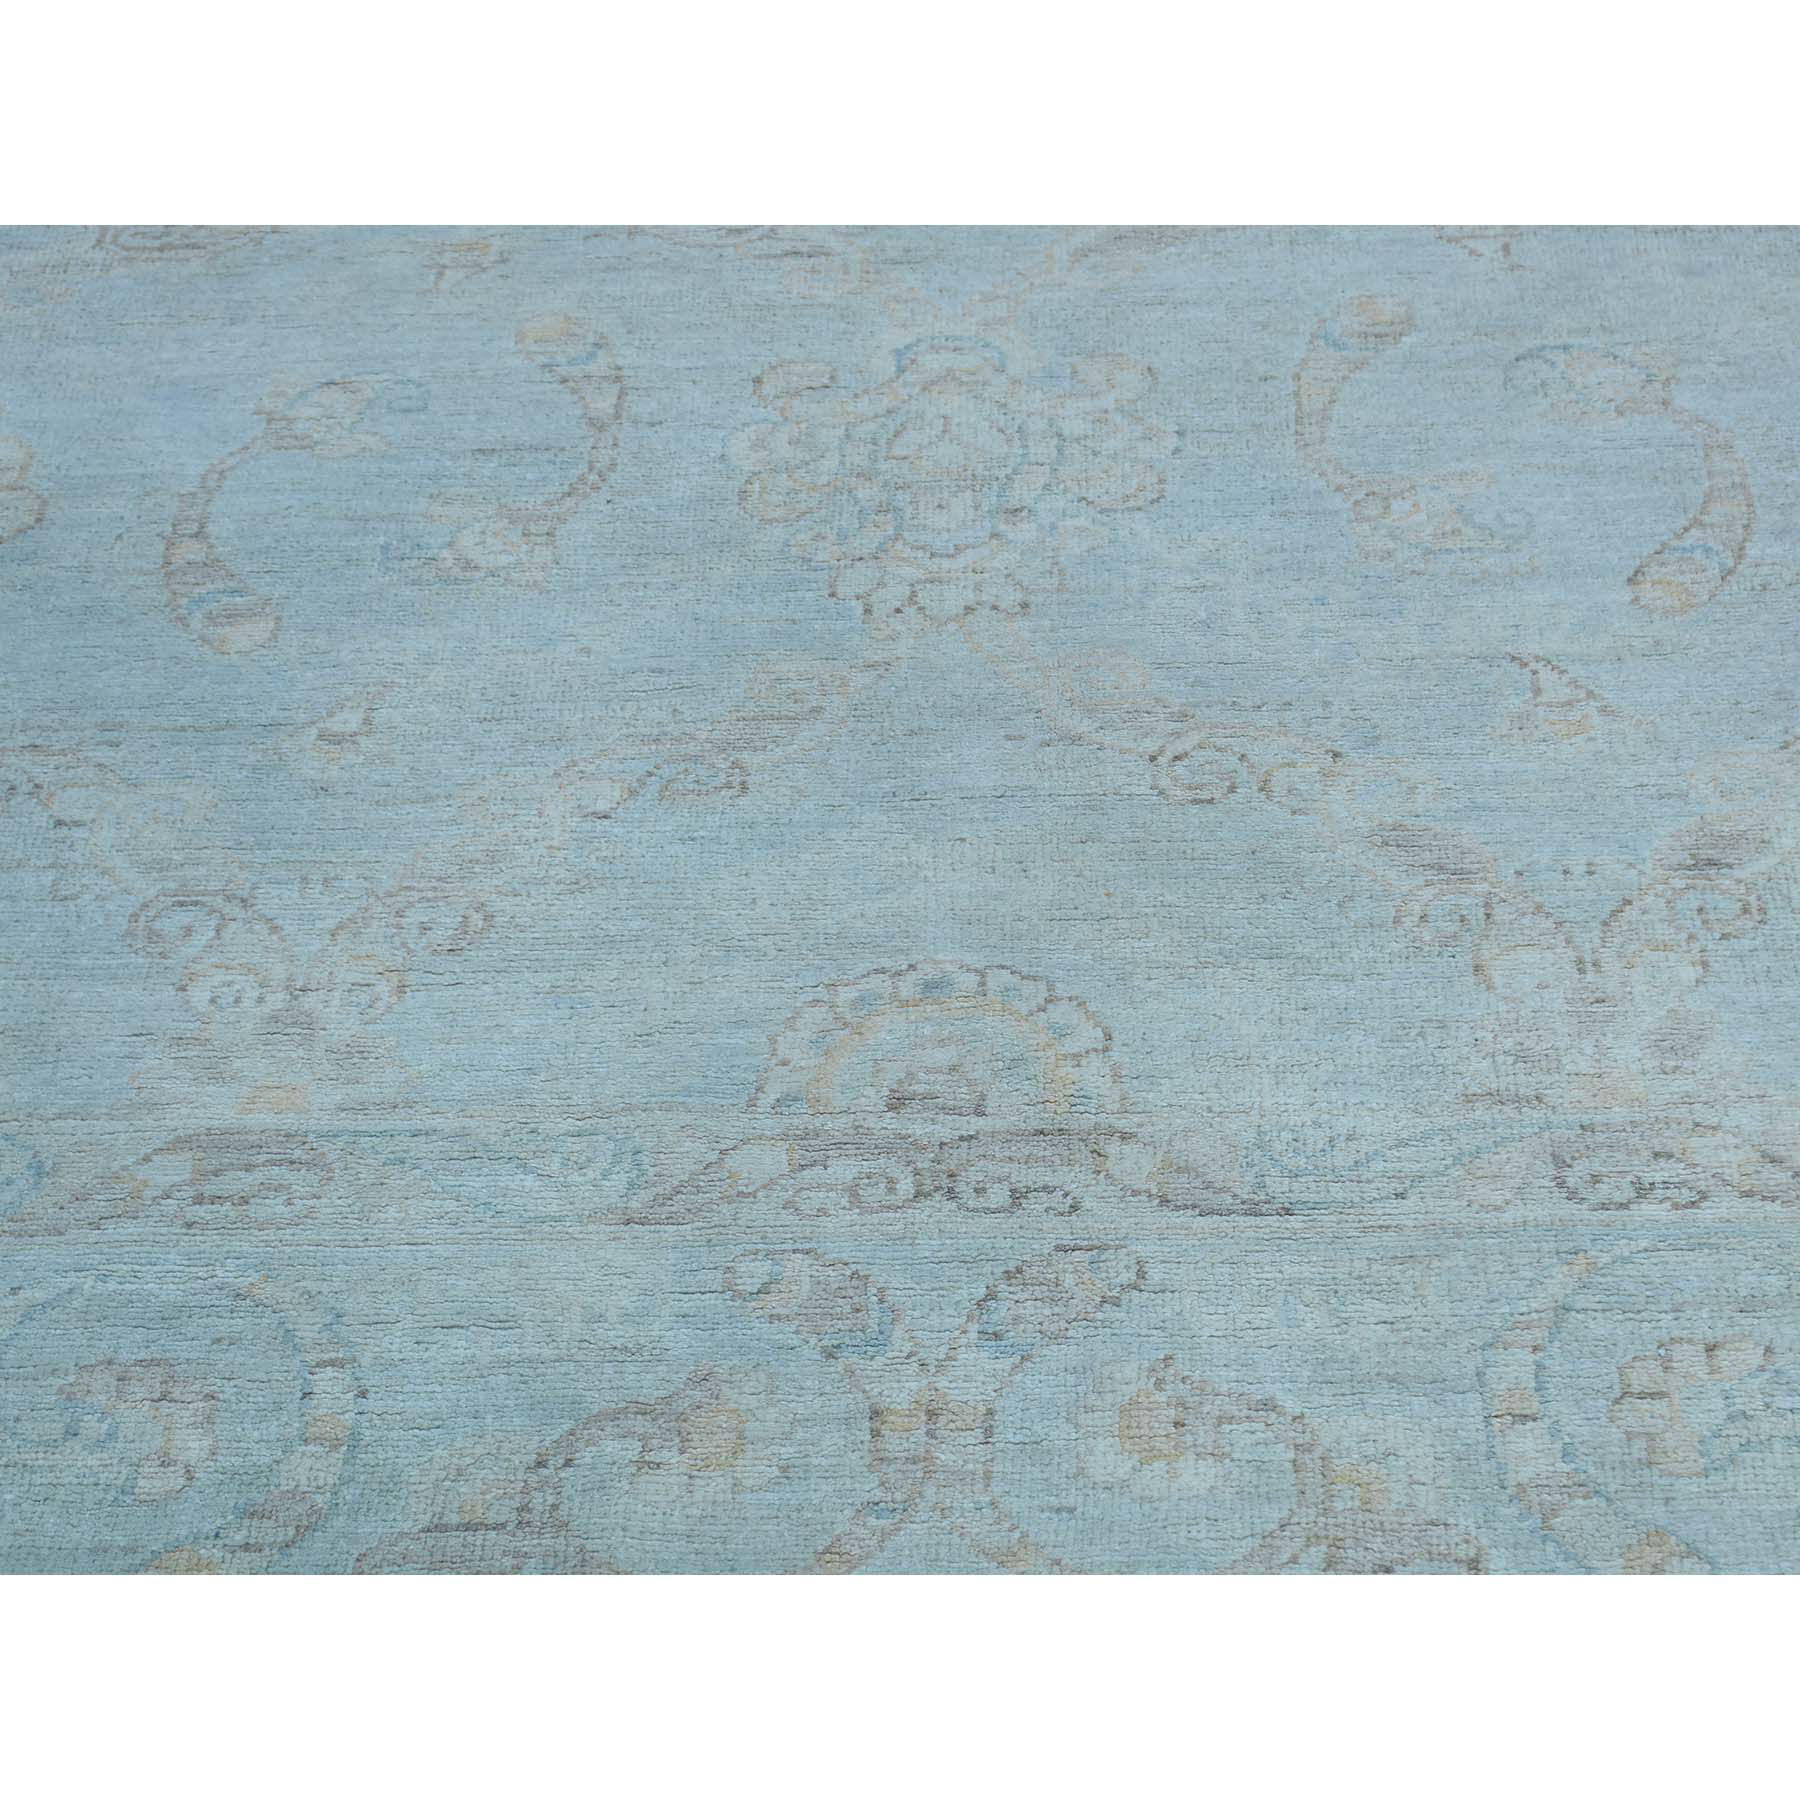 5-2 x7- Pure Wool Hand-Knotted White Wash Peshawar Oriental Rug 